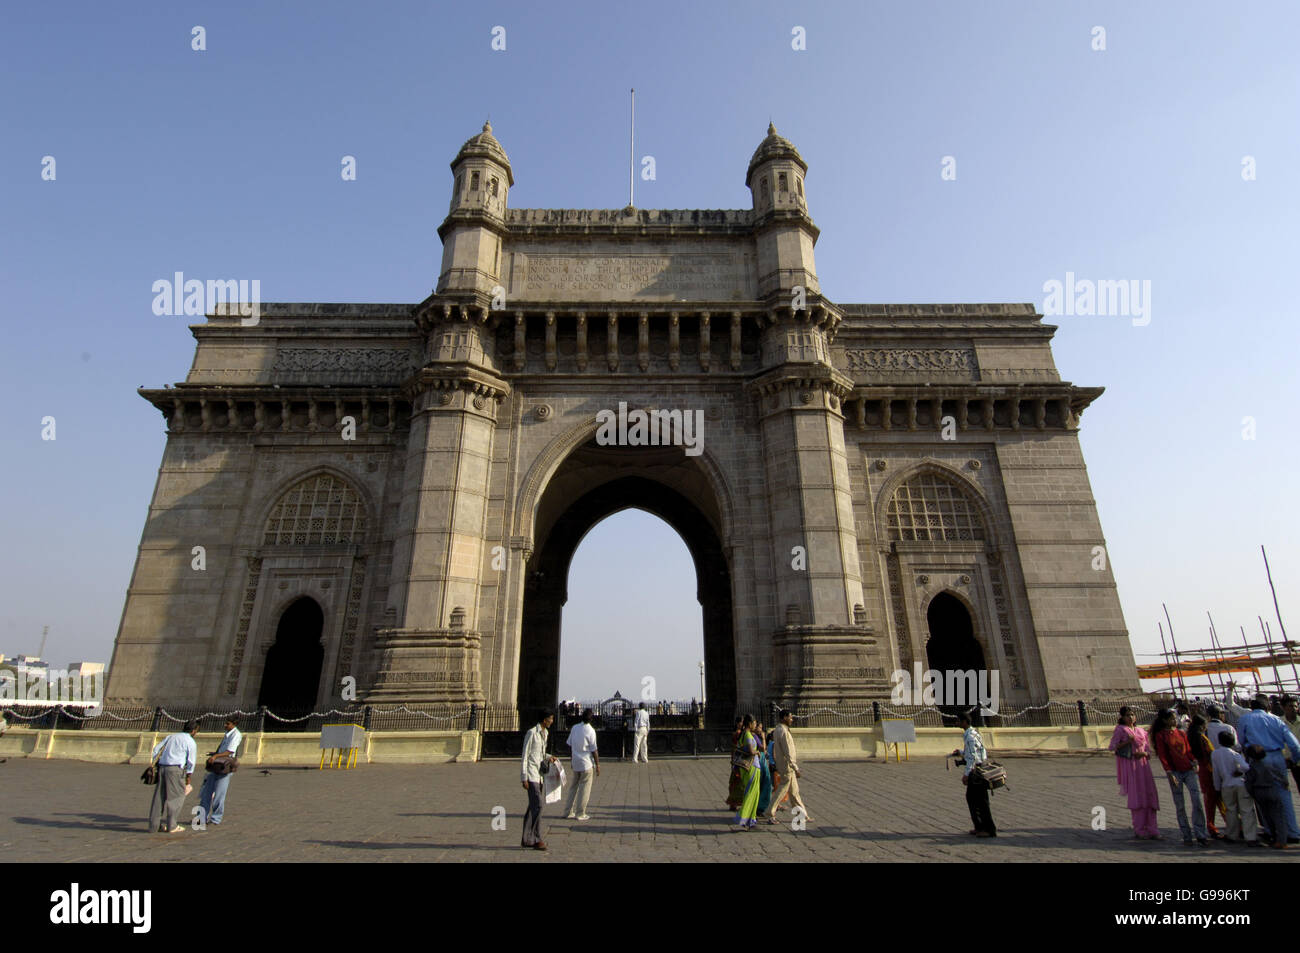 The Gateway of India in Mumbai. It was built in yellow basalt to commemorate the royal visit of George V and Queen Mary in 1911. Stock Photo